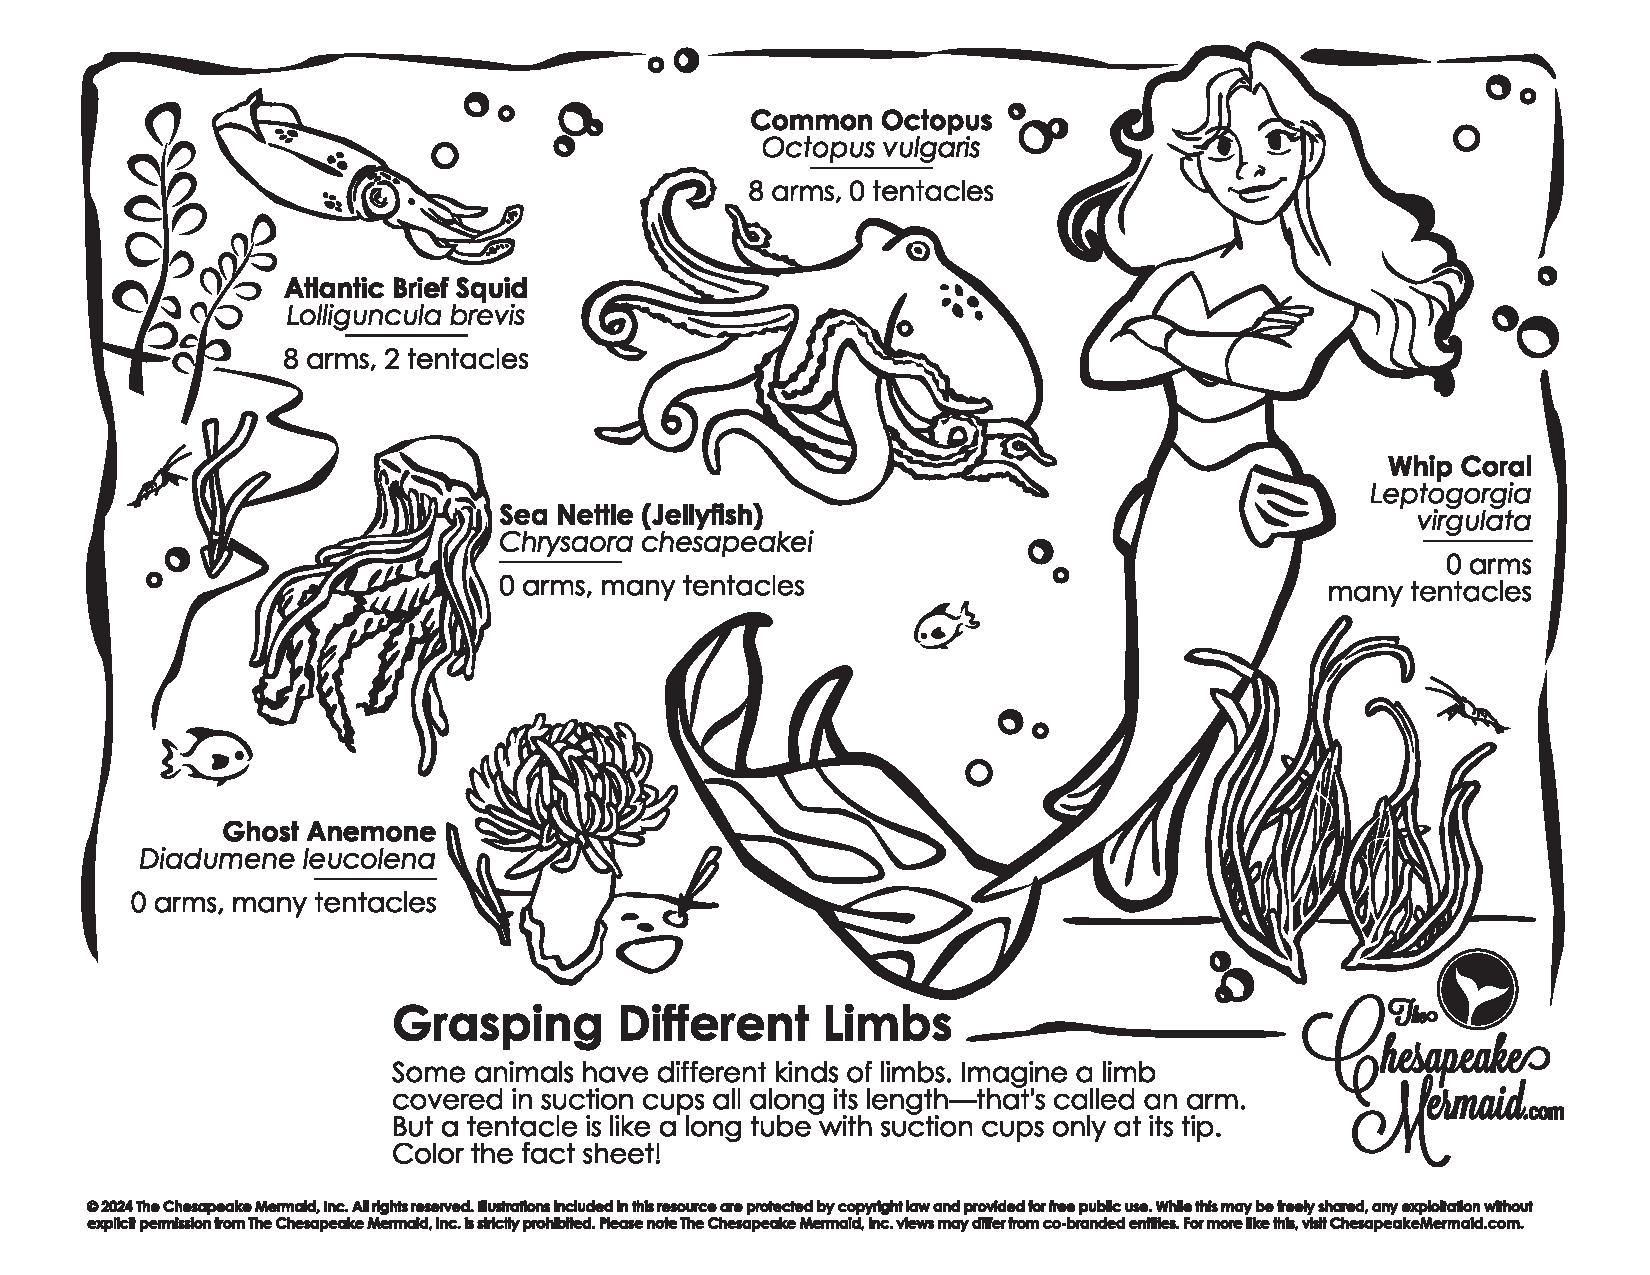 Grasping Different Limbs!